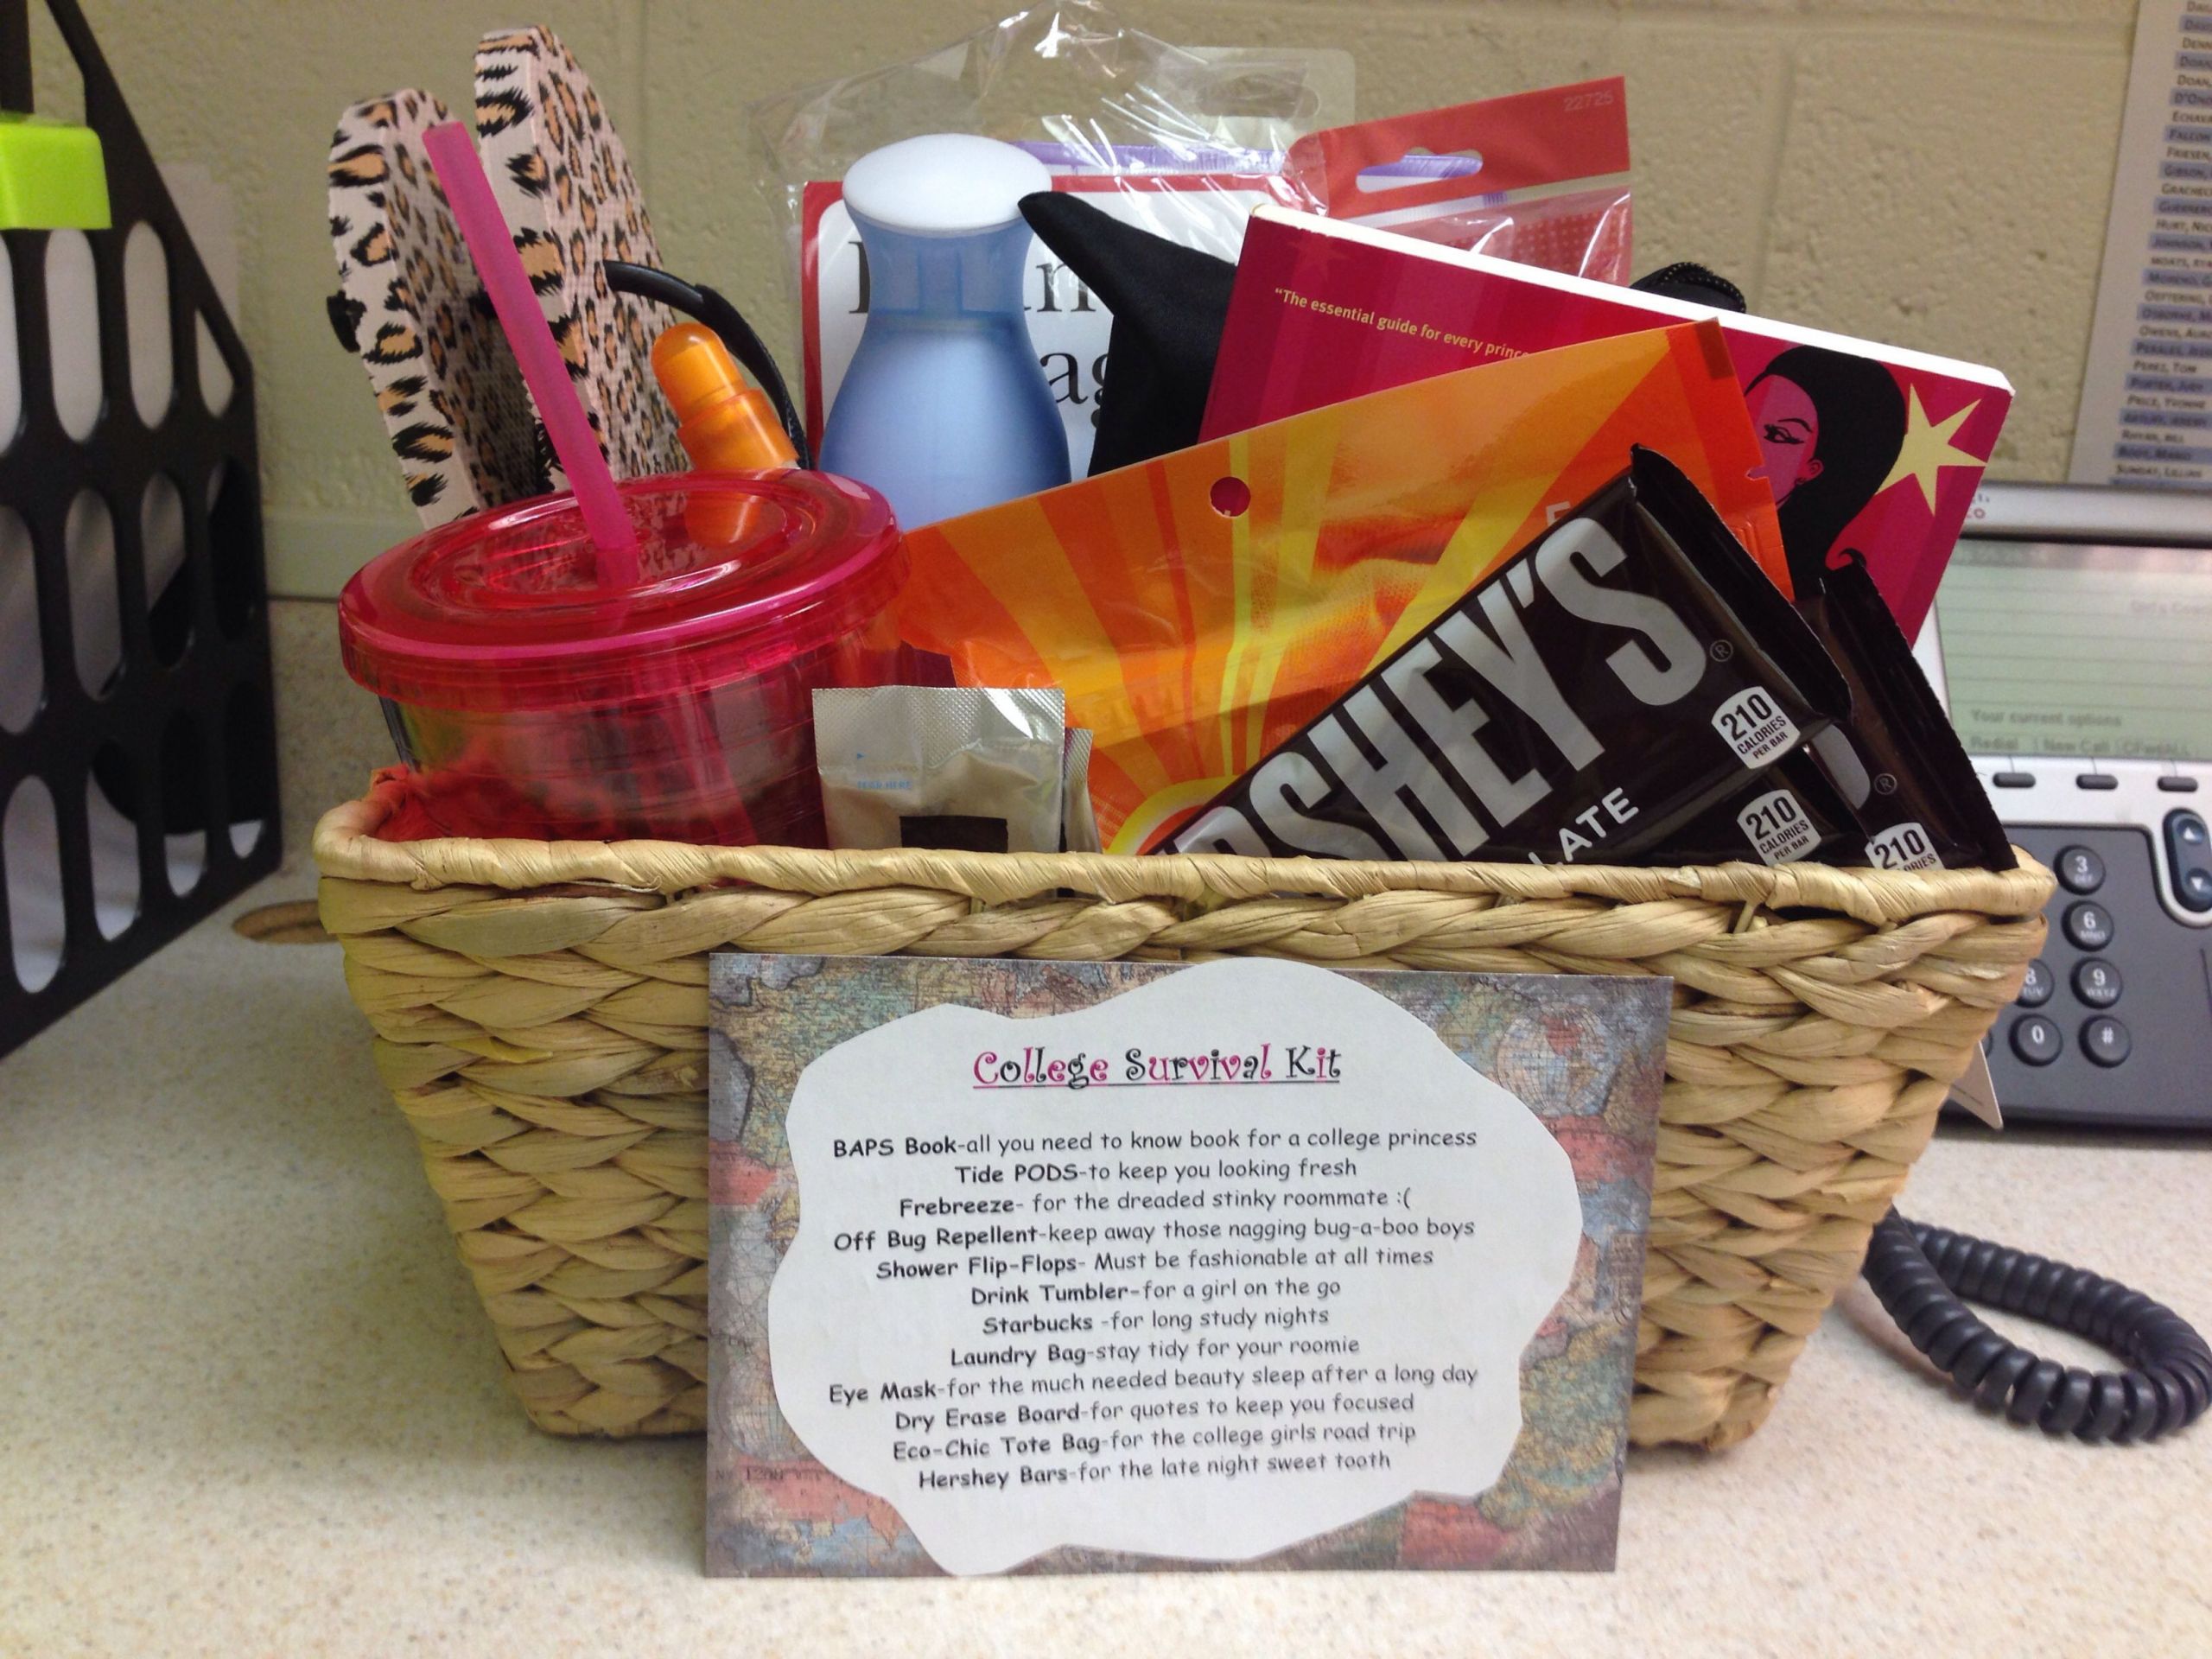 High School Graduation Gift Ideas For Sister
 College Survival kit for the high school grad My sister